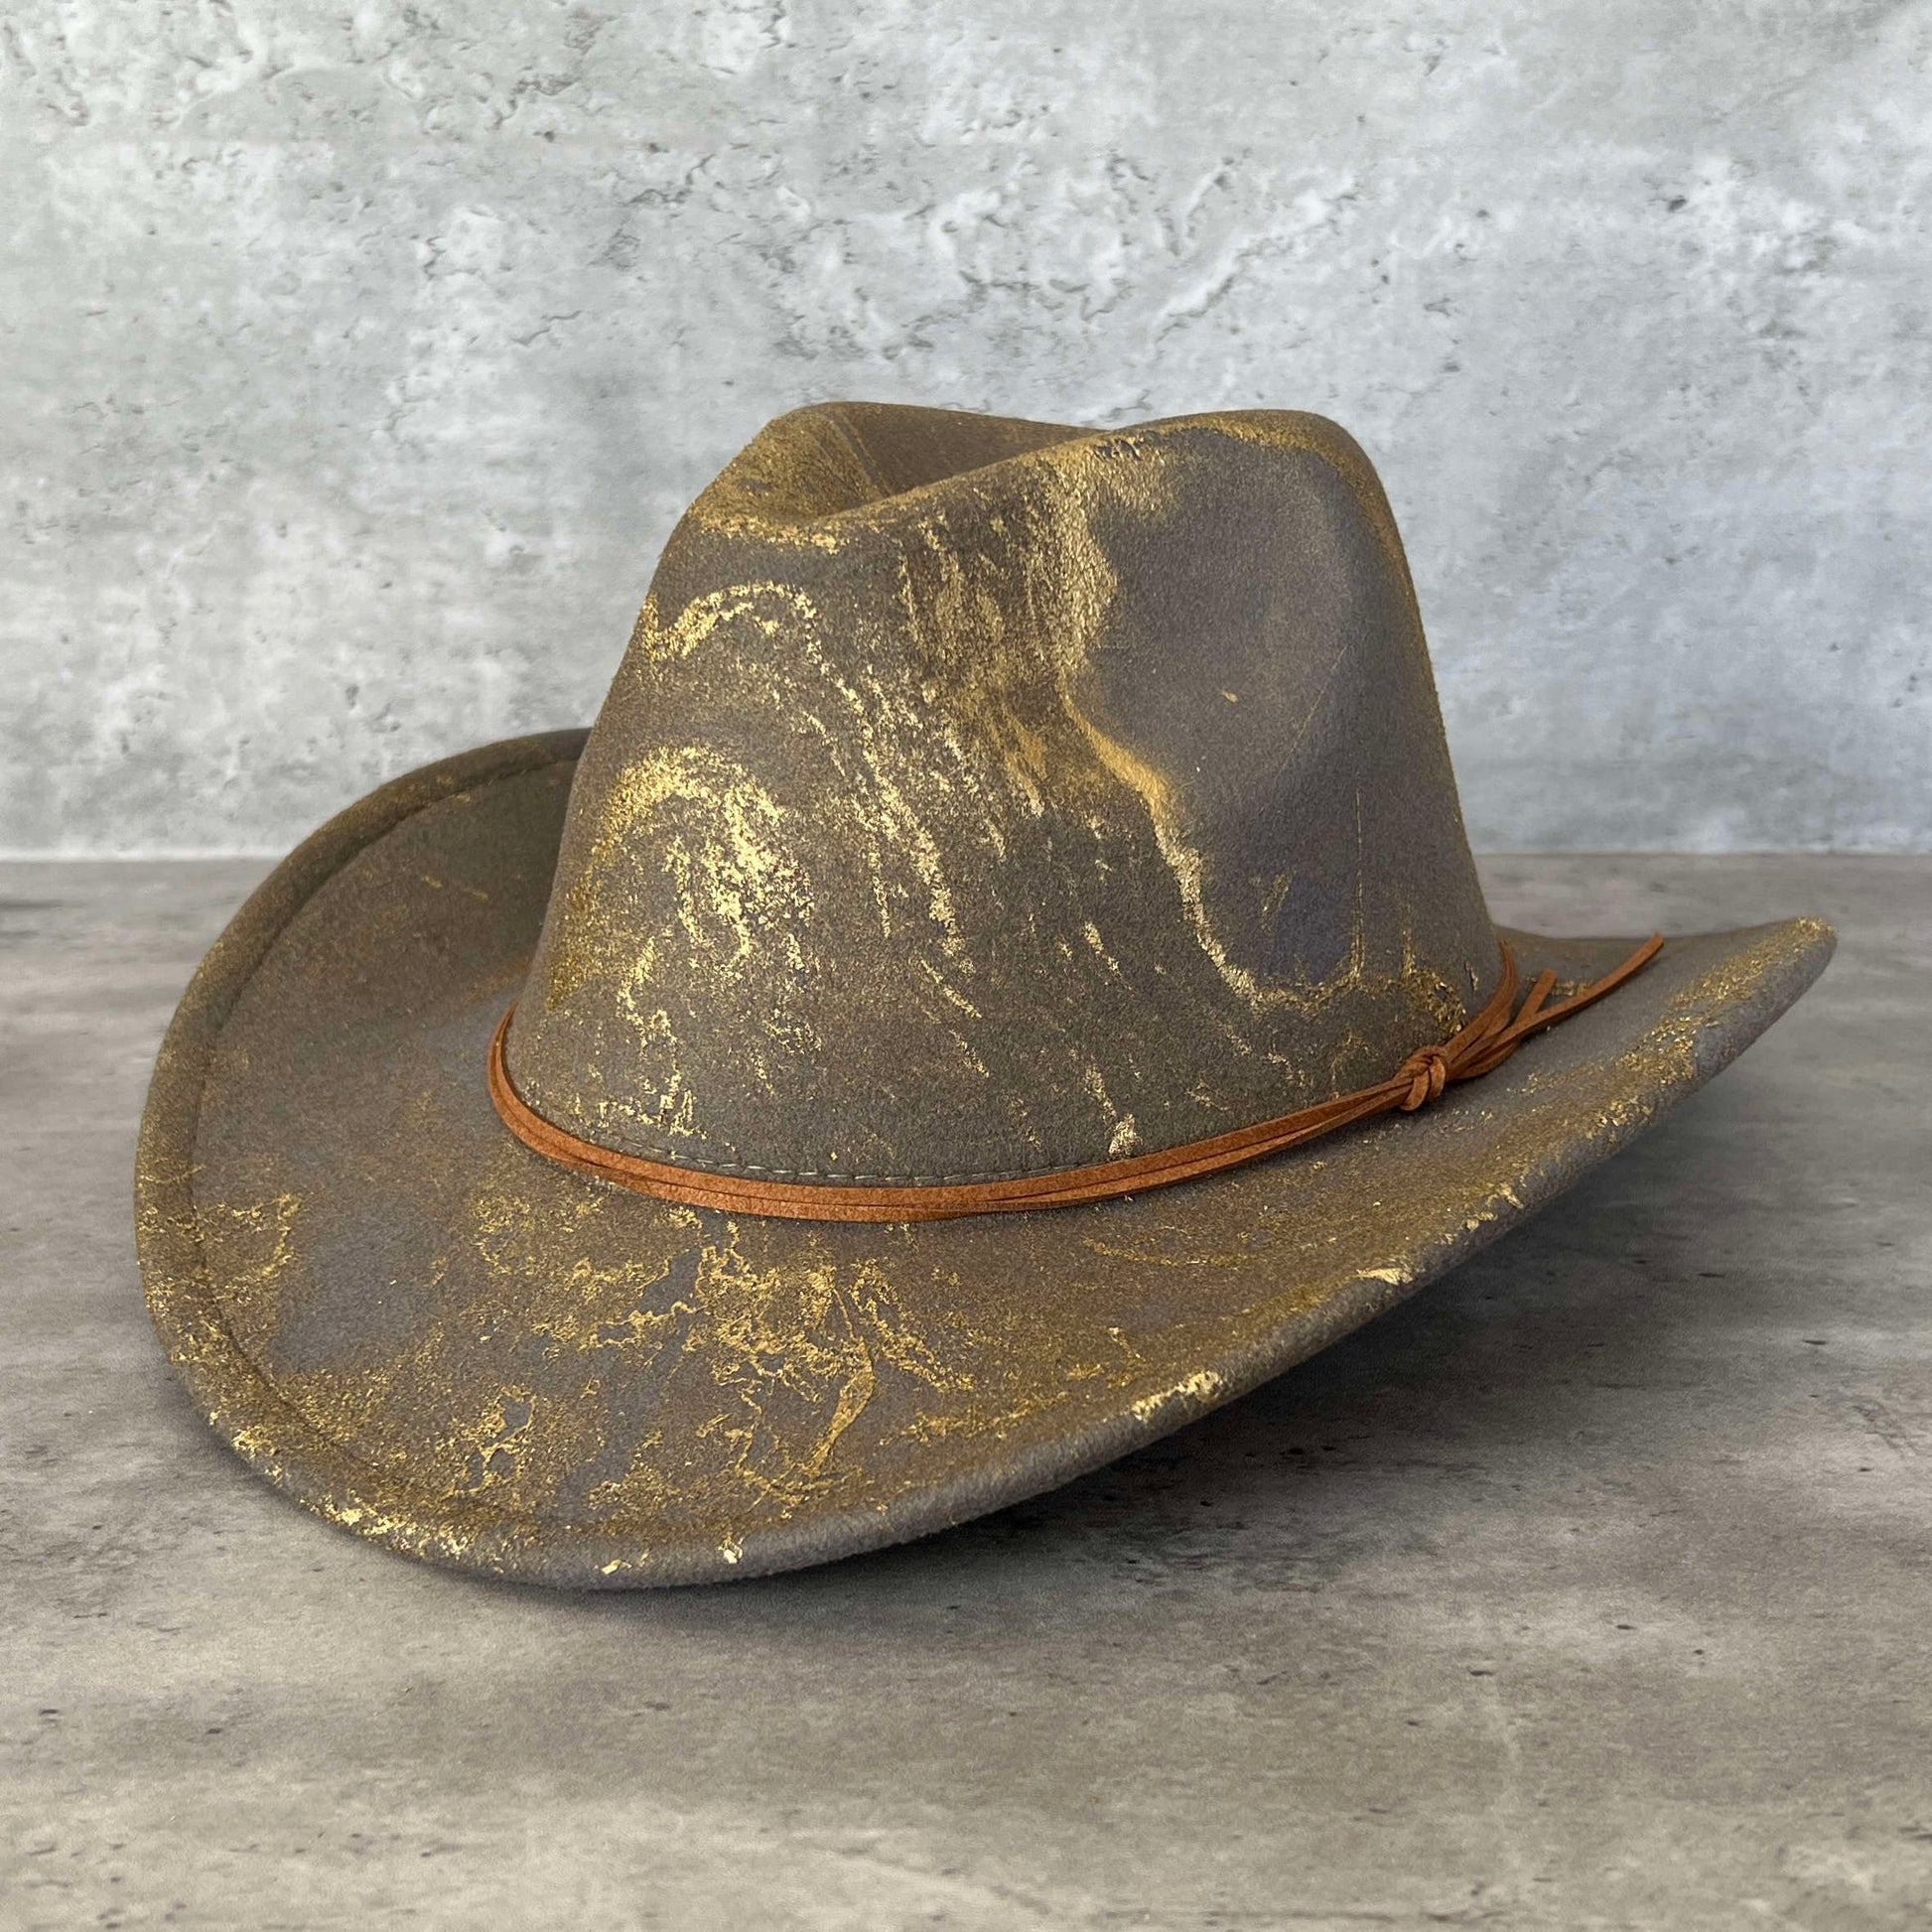 Light gray western cowboy hat painted with gold marbling. Has light brown faux suede cord hat band. 